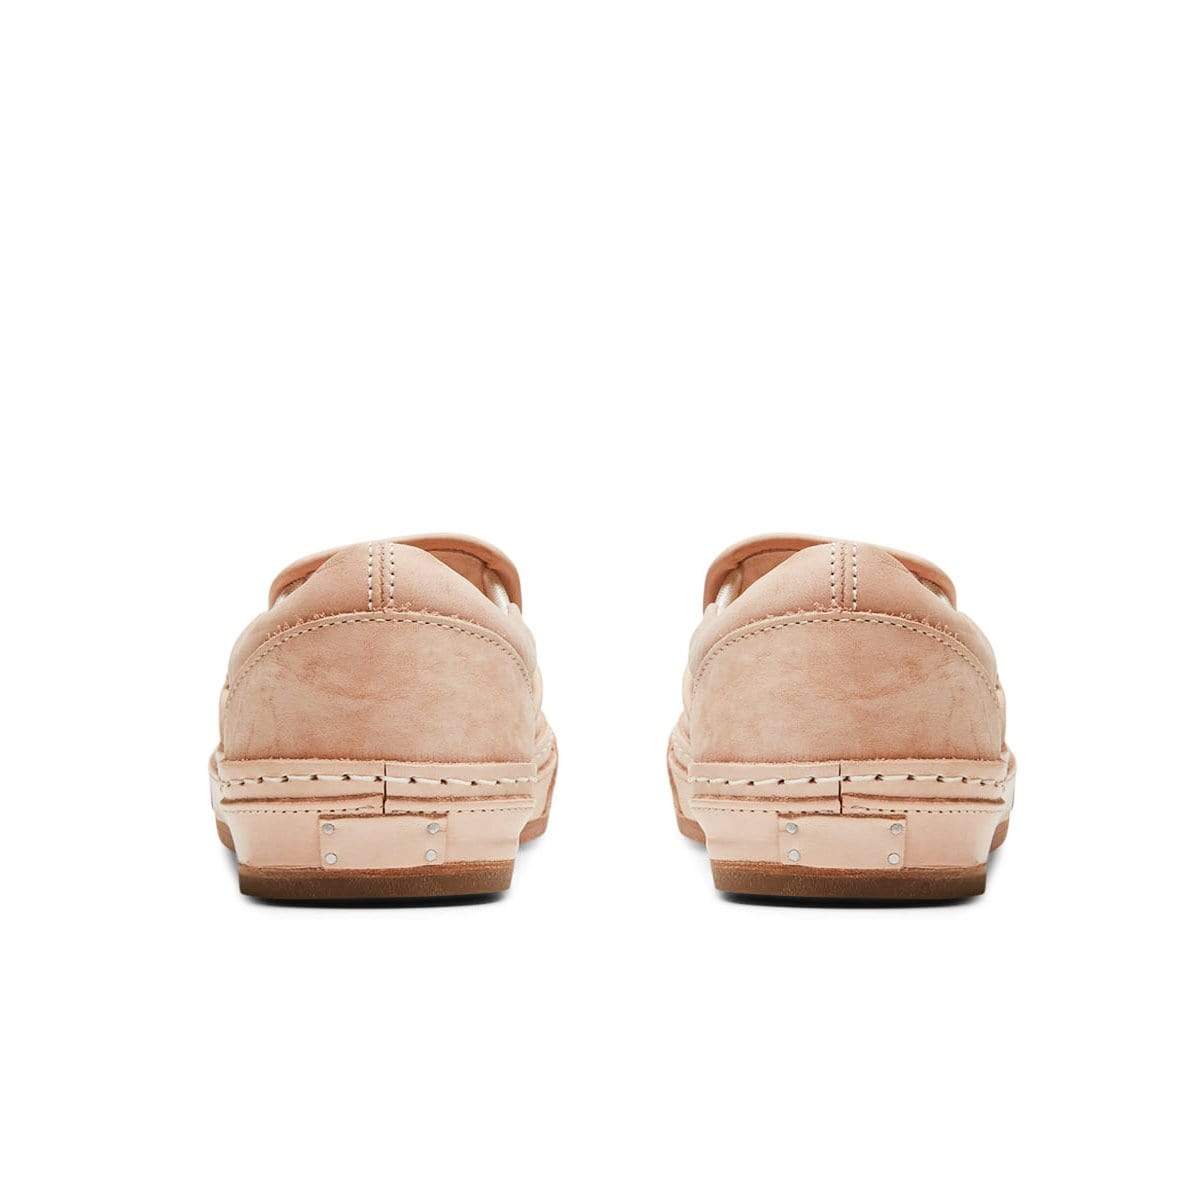 Hender Scheme Shoes MANUAL INDUSTRIAL PRODUCTS 17